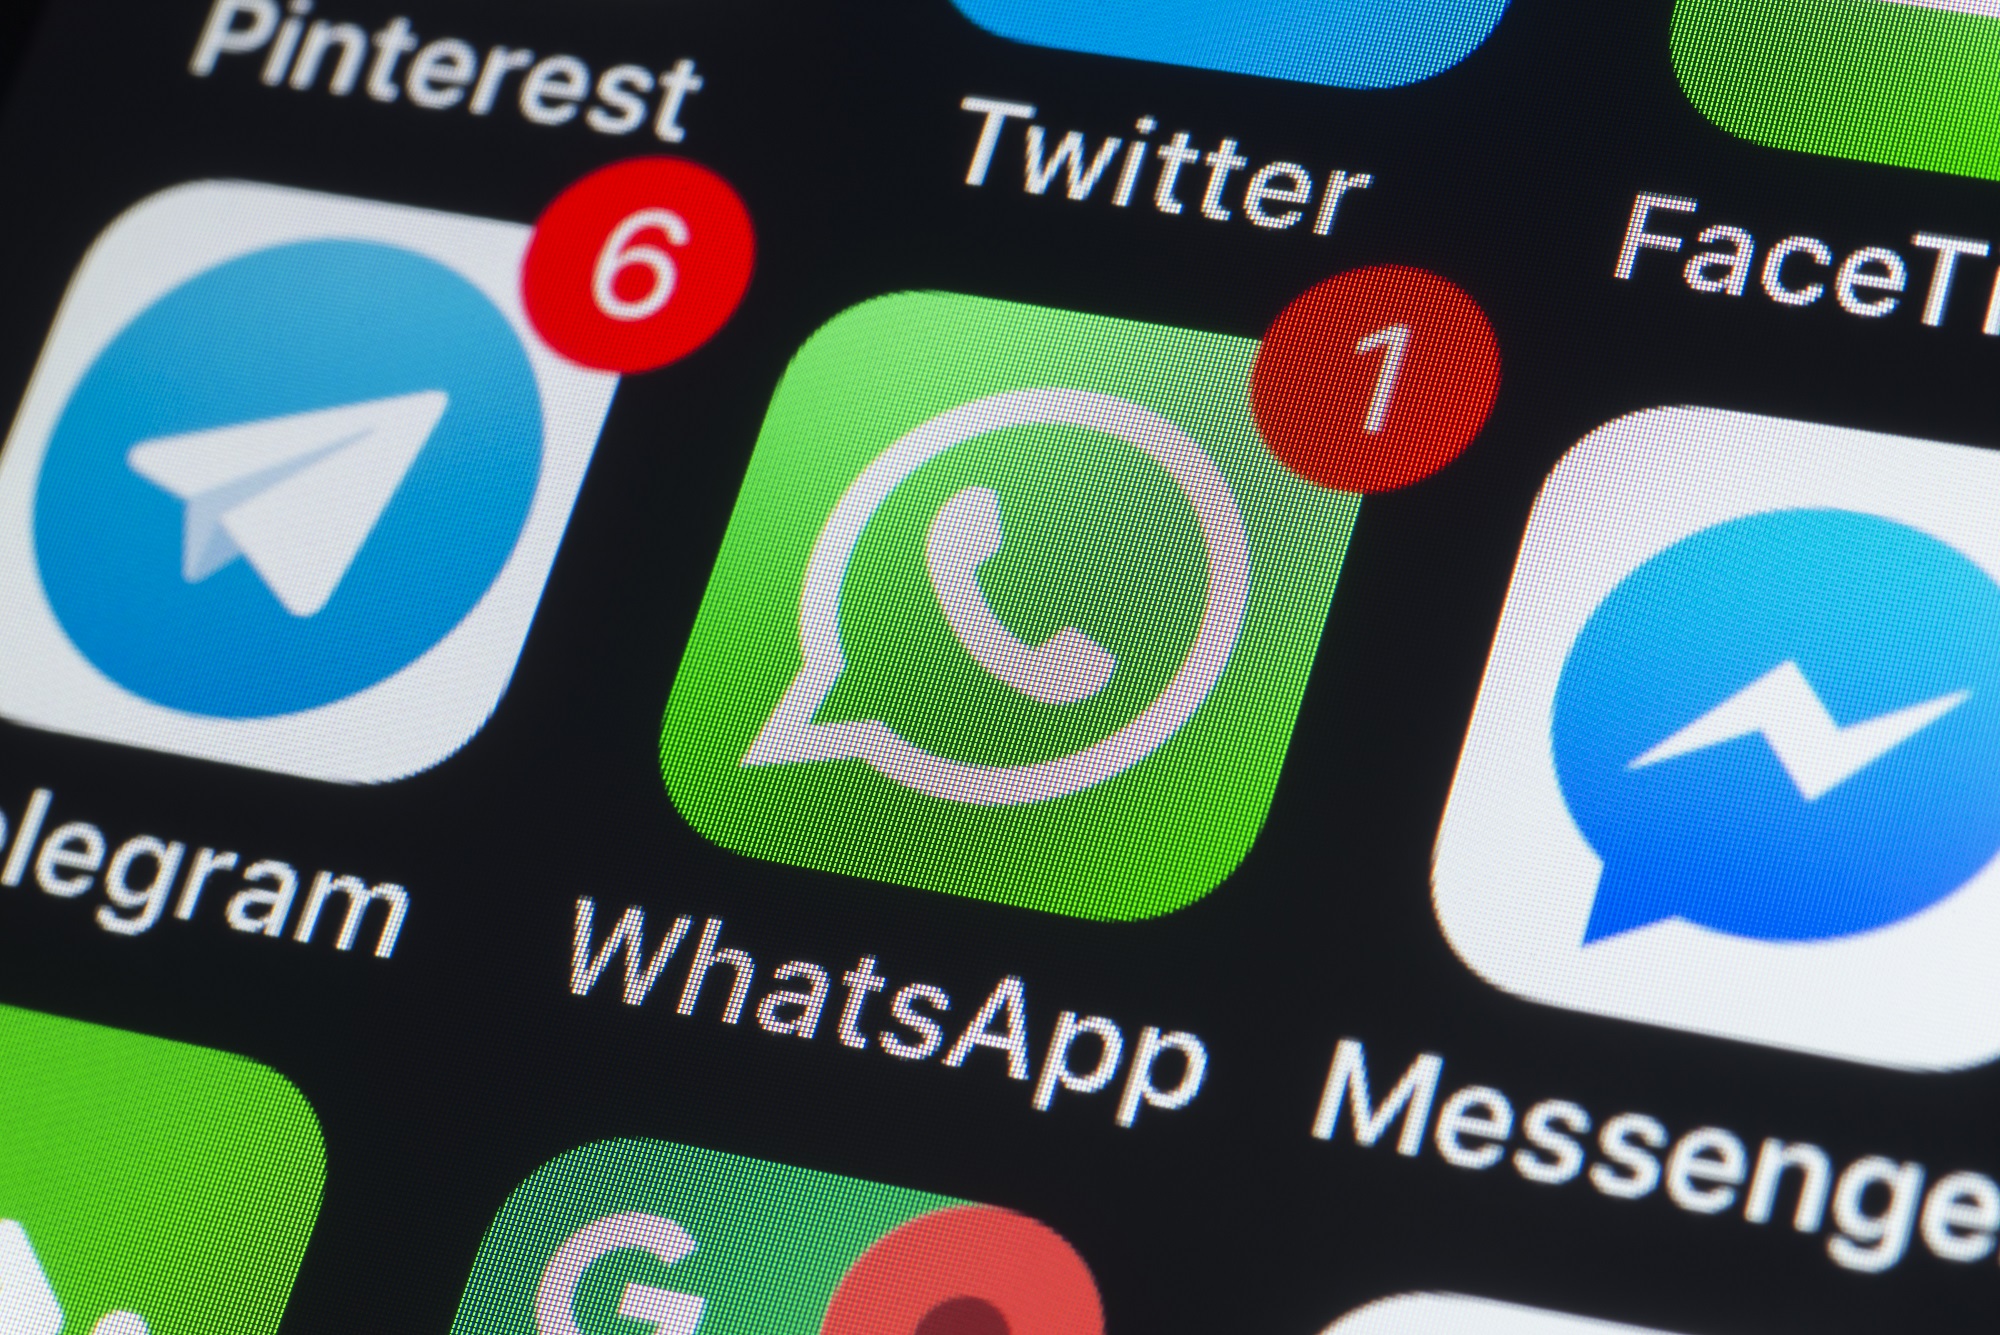 WhatsApp in the Workplace – Risks for employers